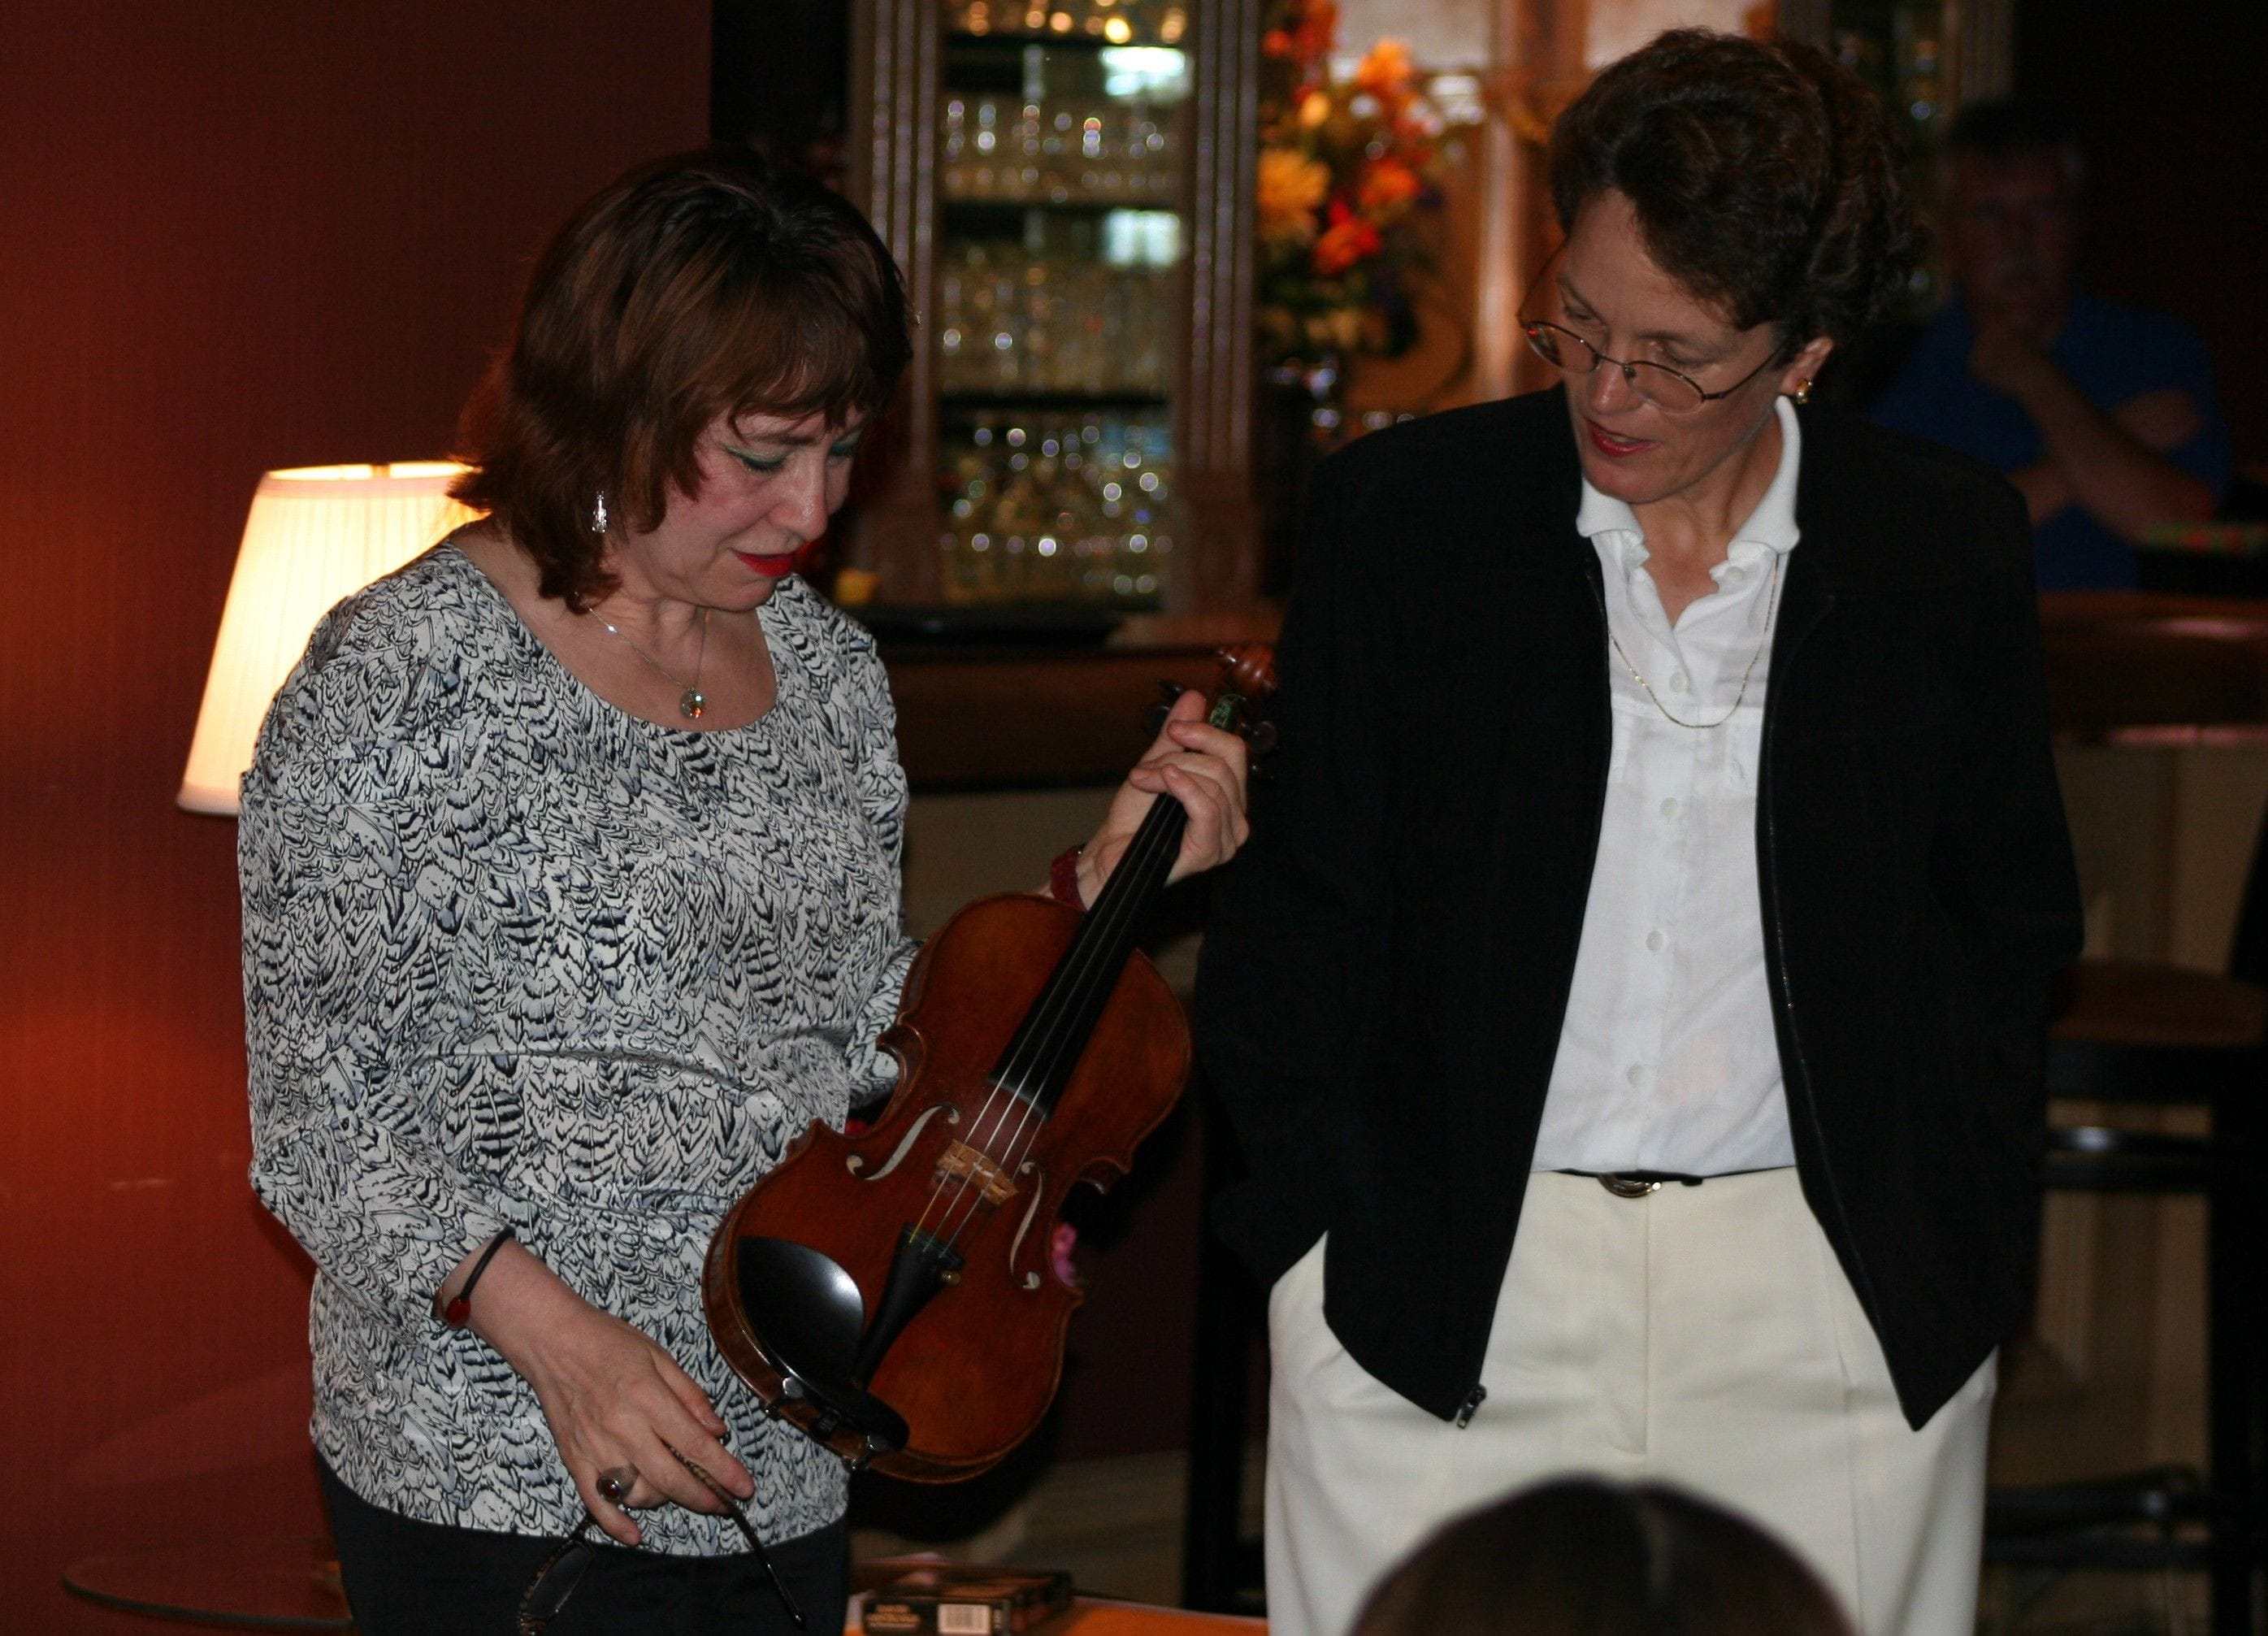 Rimma Sushanskaya, Violinist and OCO Music Director Roberta Carpenter, explain the nature of violins to 'The Score Came Second...' series attendees.